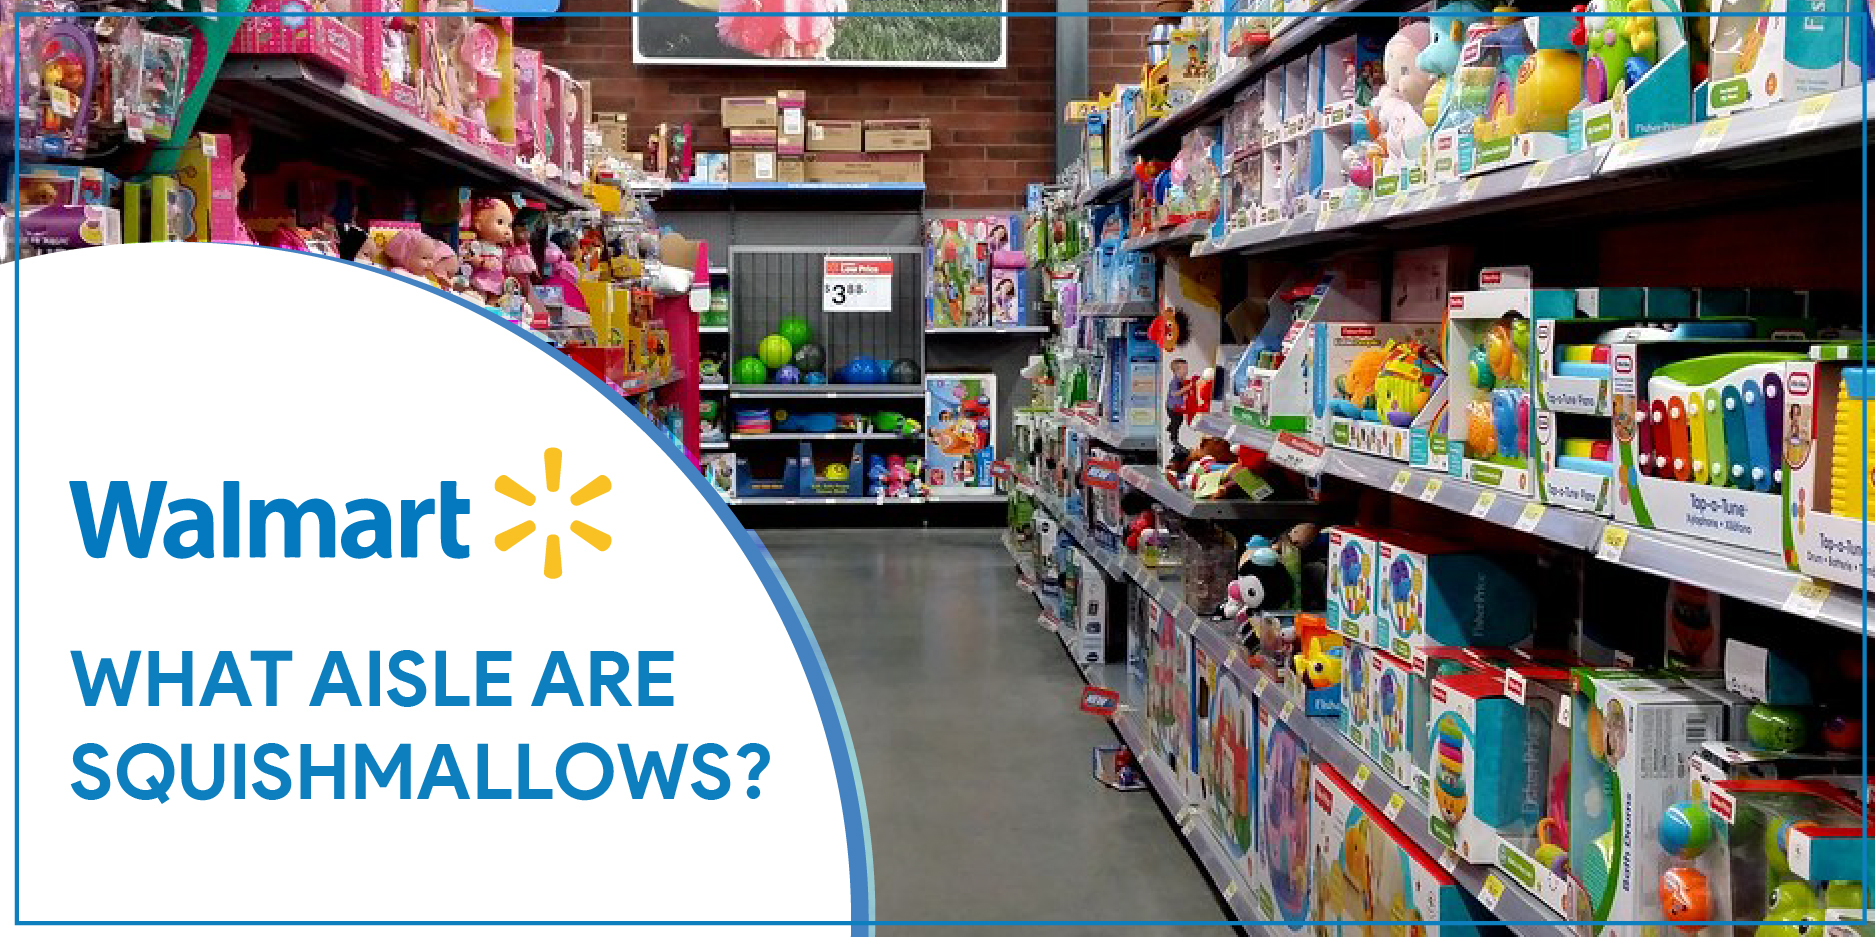 Does Walmart Have Squishmallows? | Find Out The Aisle and Their Price